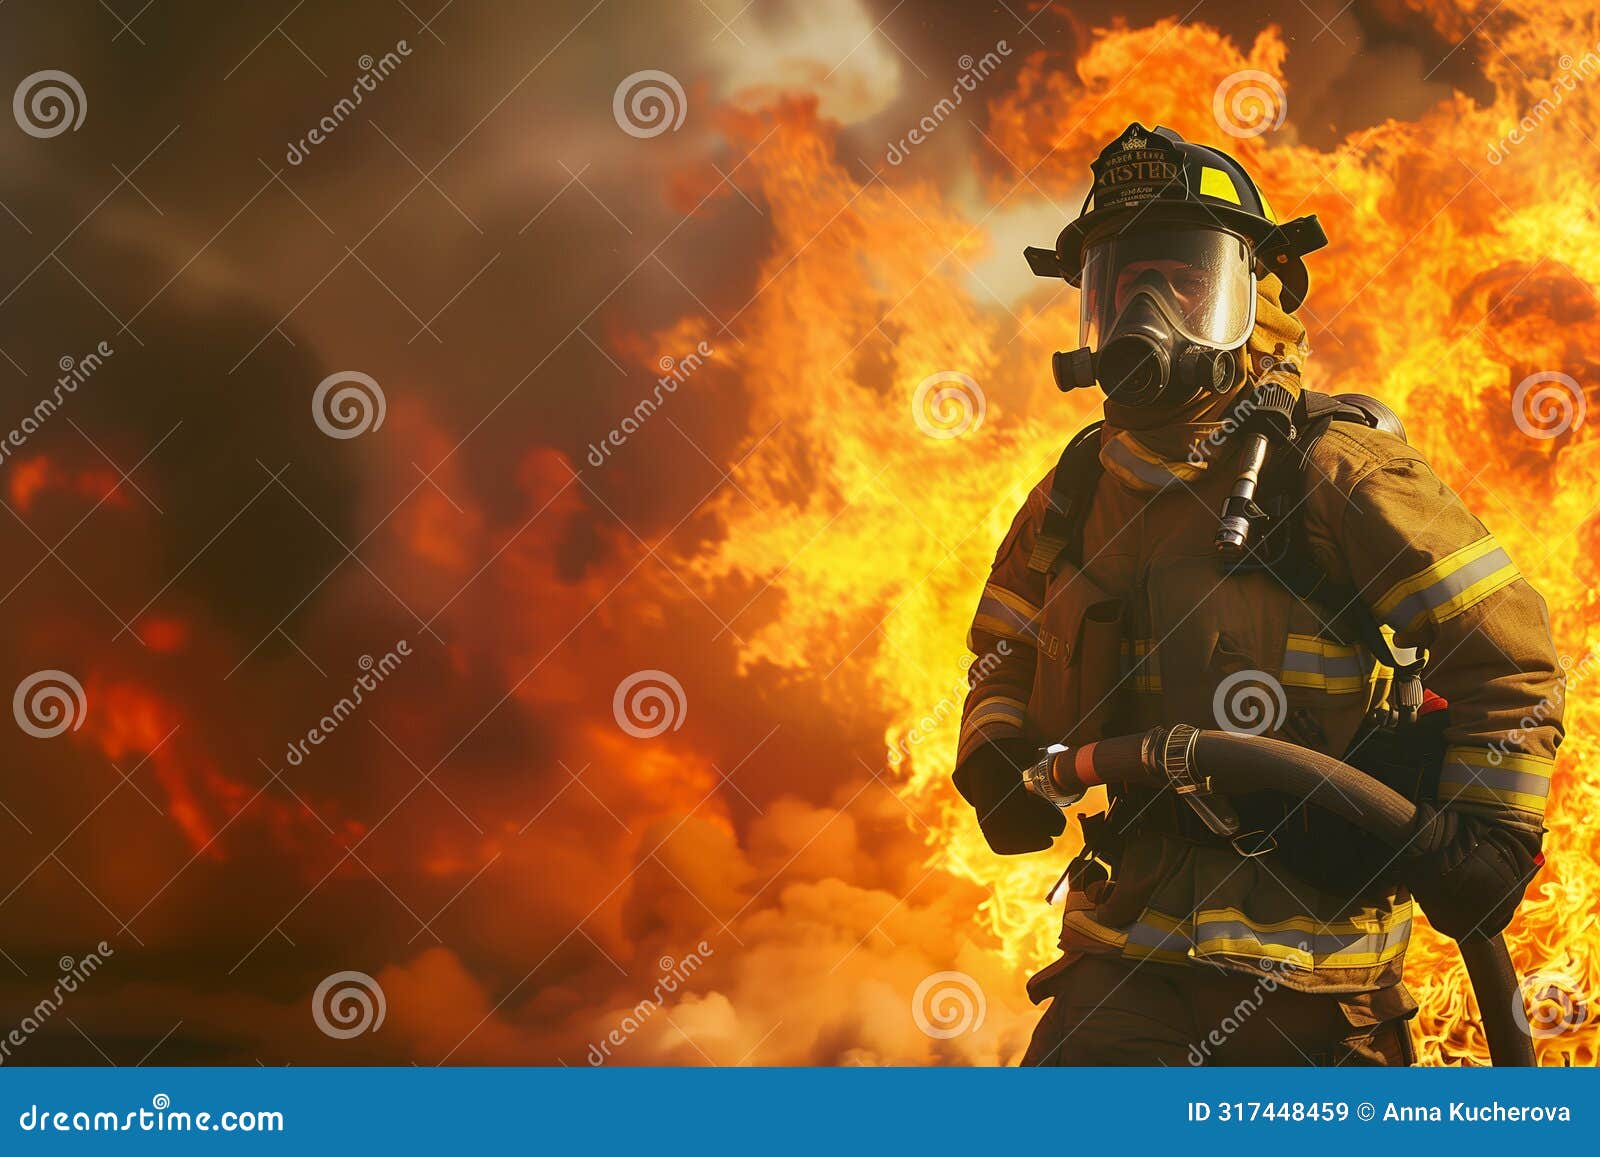 firefighter ready for action in front of a fierce blaze